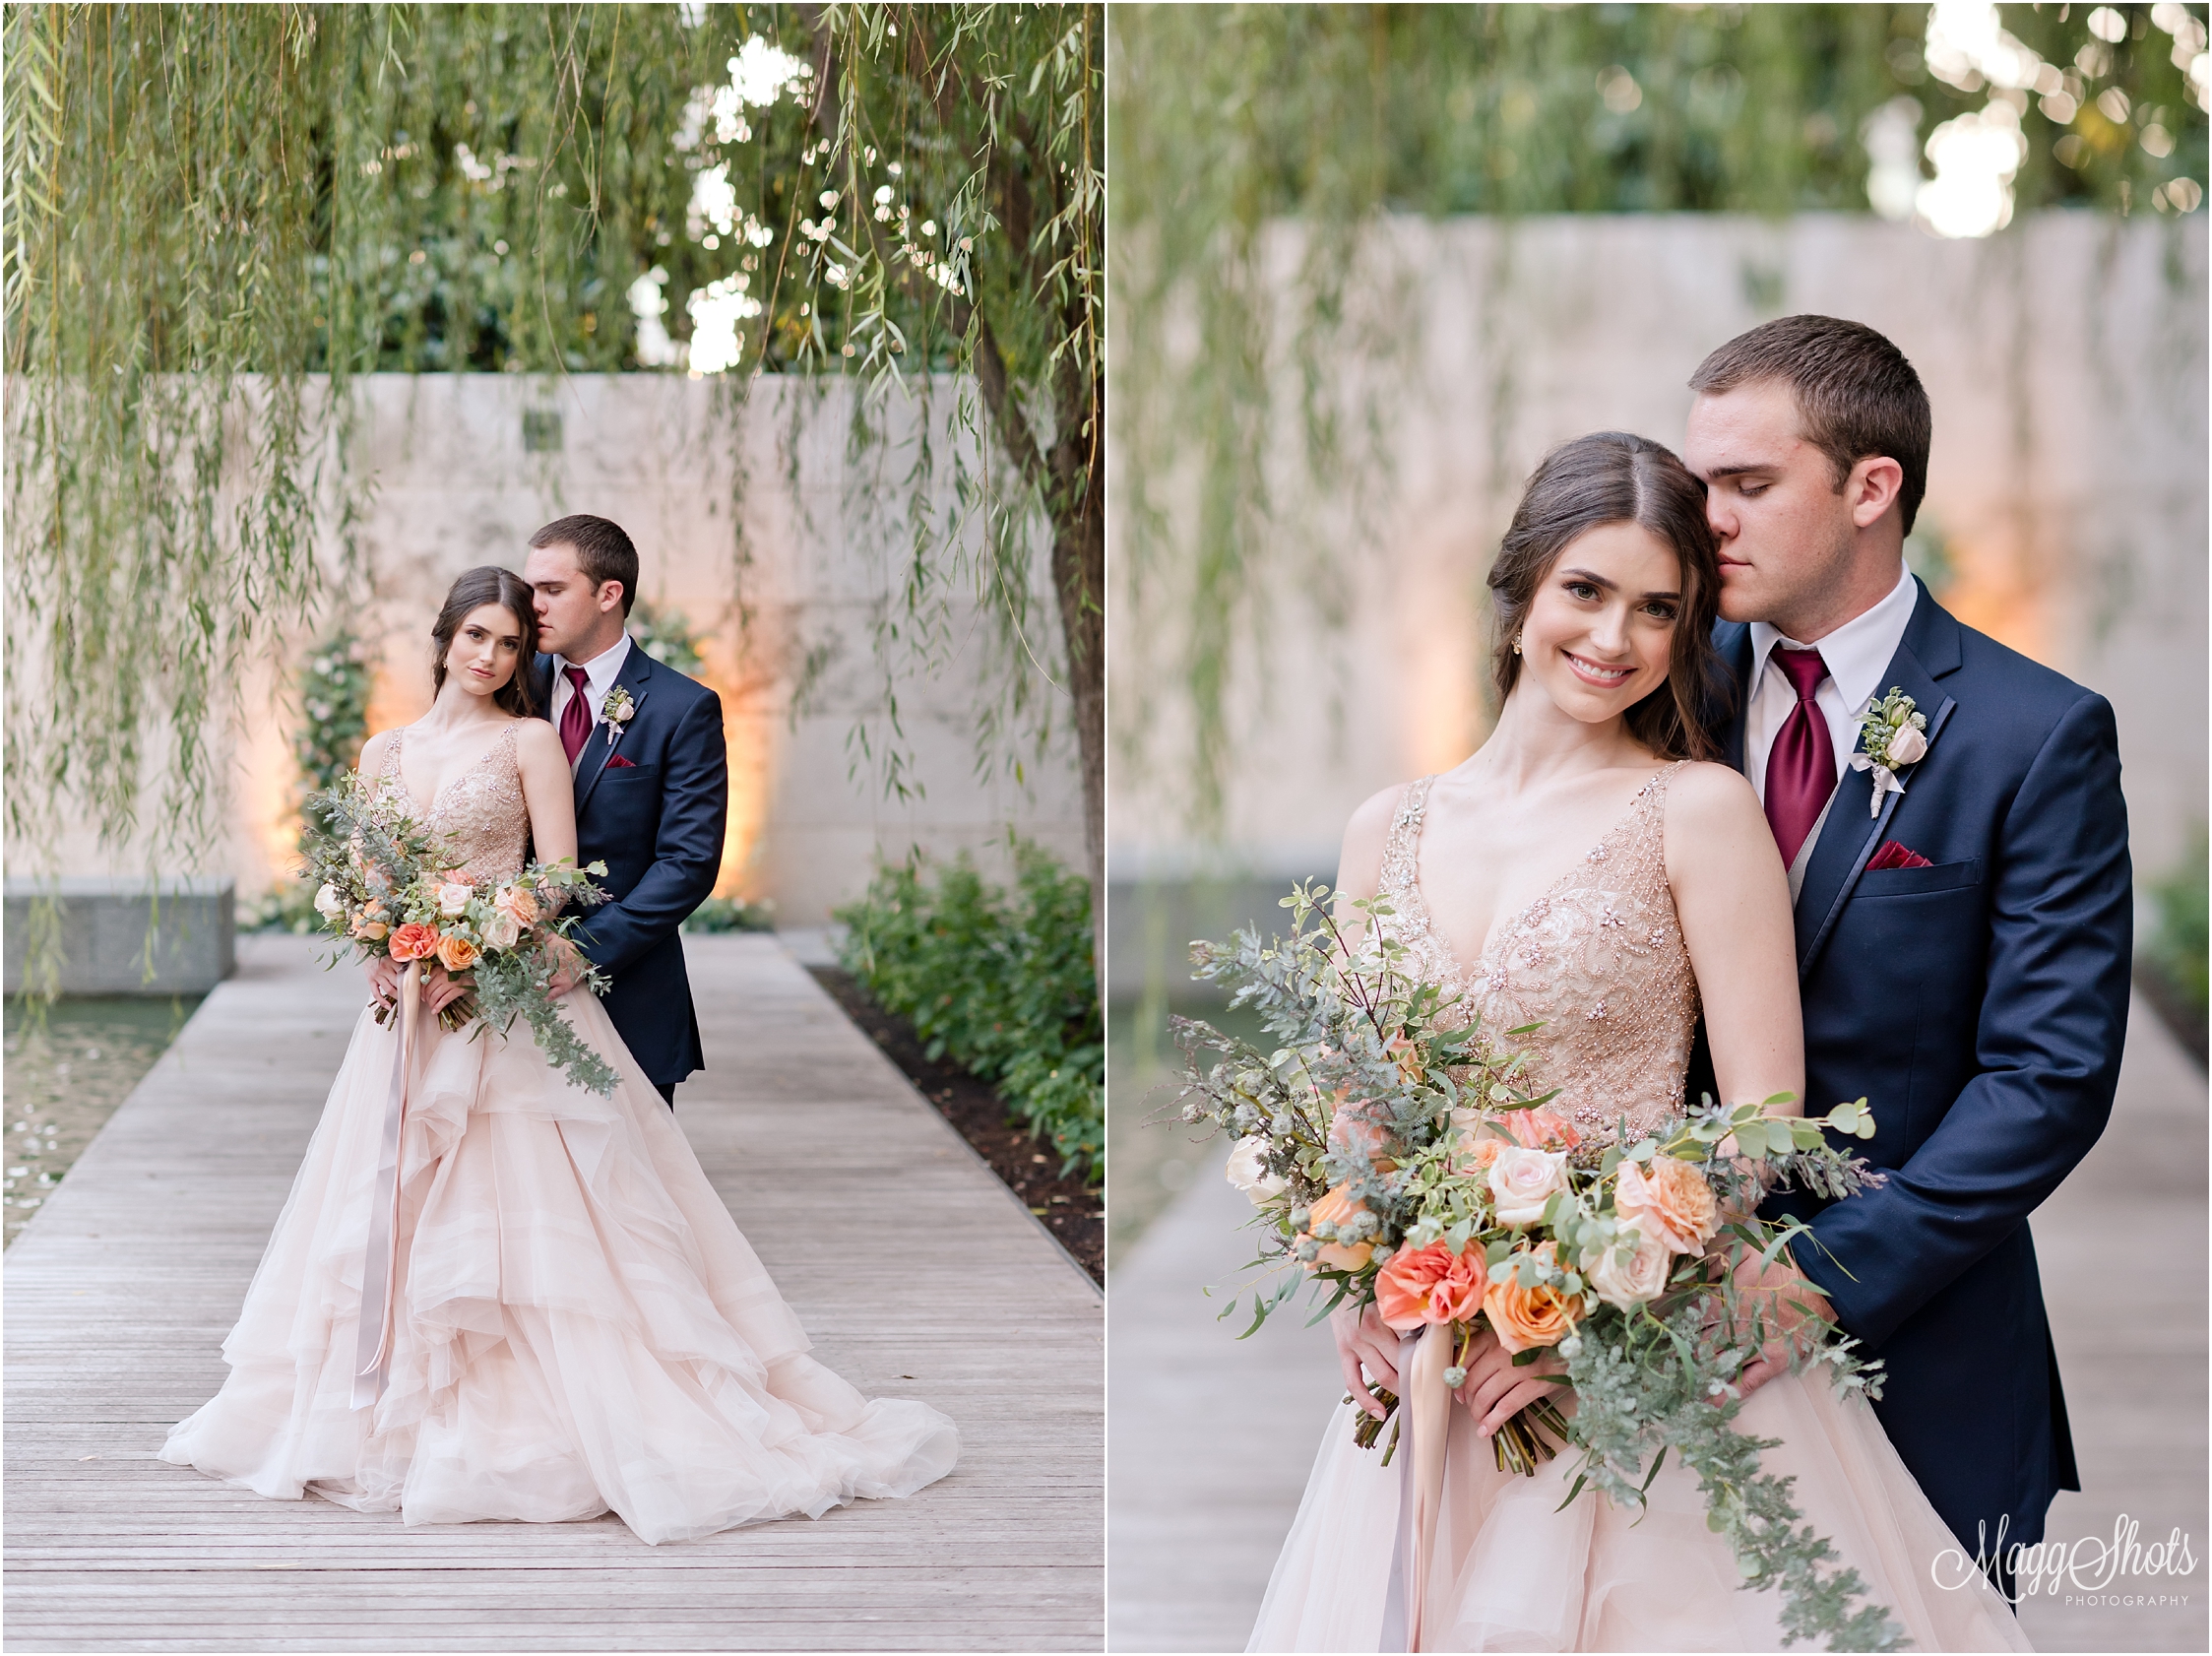 Styled Shoot, Wedding, Love, MaggShots Photography, MaggShots, Professional Photography, Professional Photographer, Couple, Bouquet, Flowers, Ring, The Washer Sculpture Center, Dallas, Bride and Groom